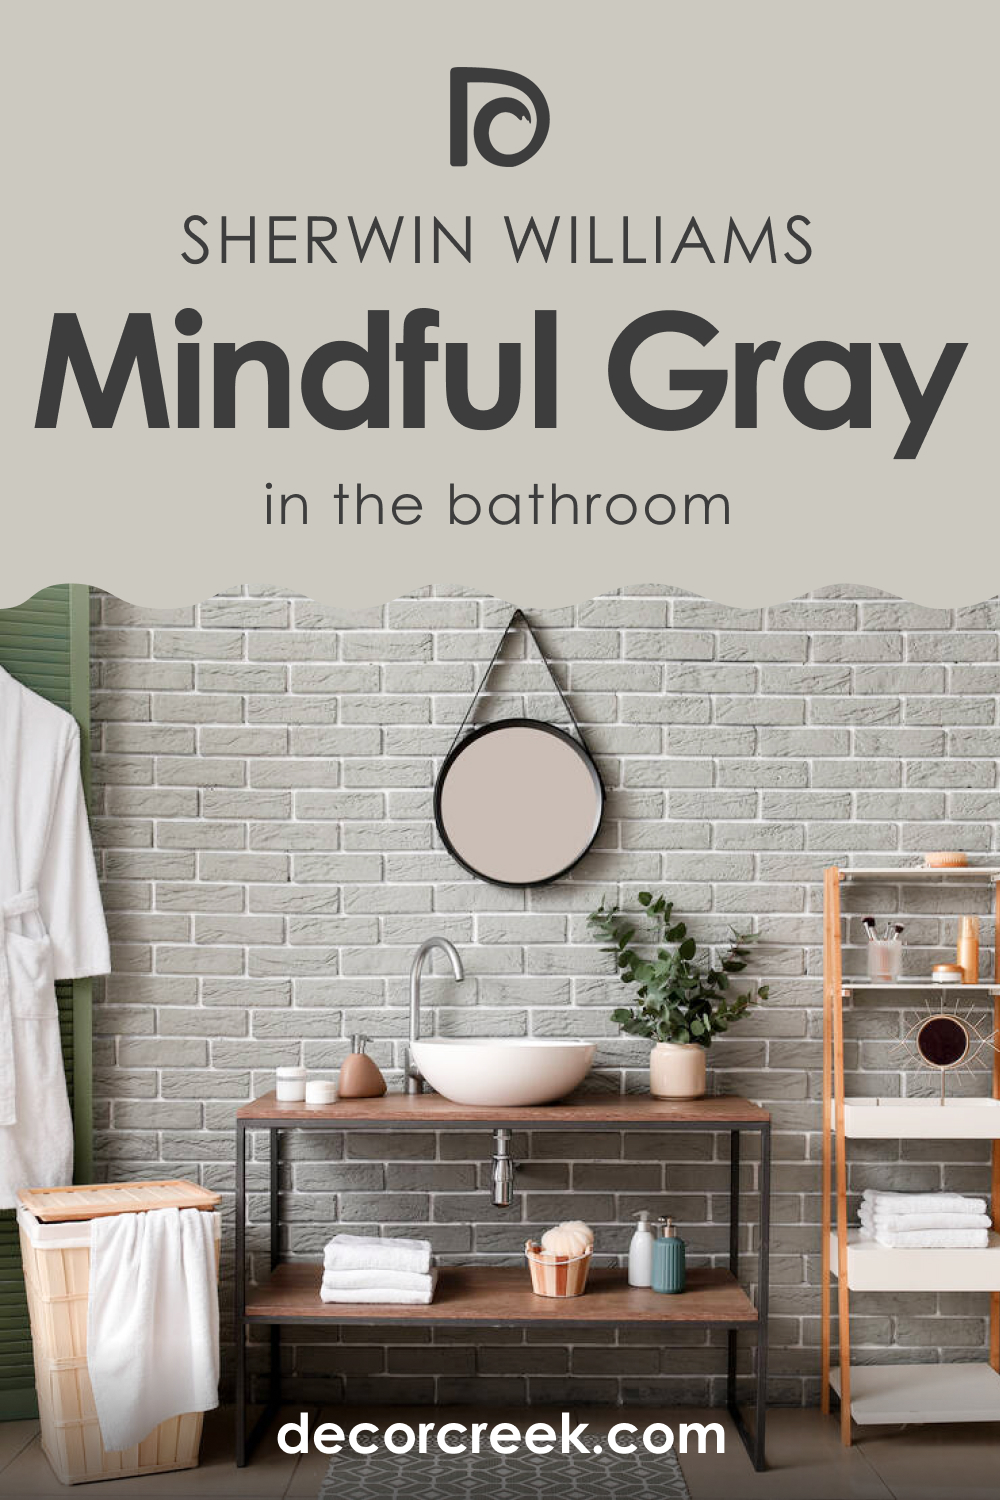 How to Use SW 7016 Mindful Gray in the Bathroom?